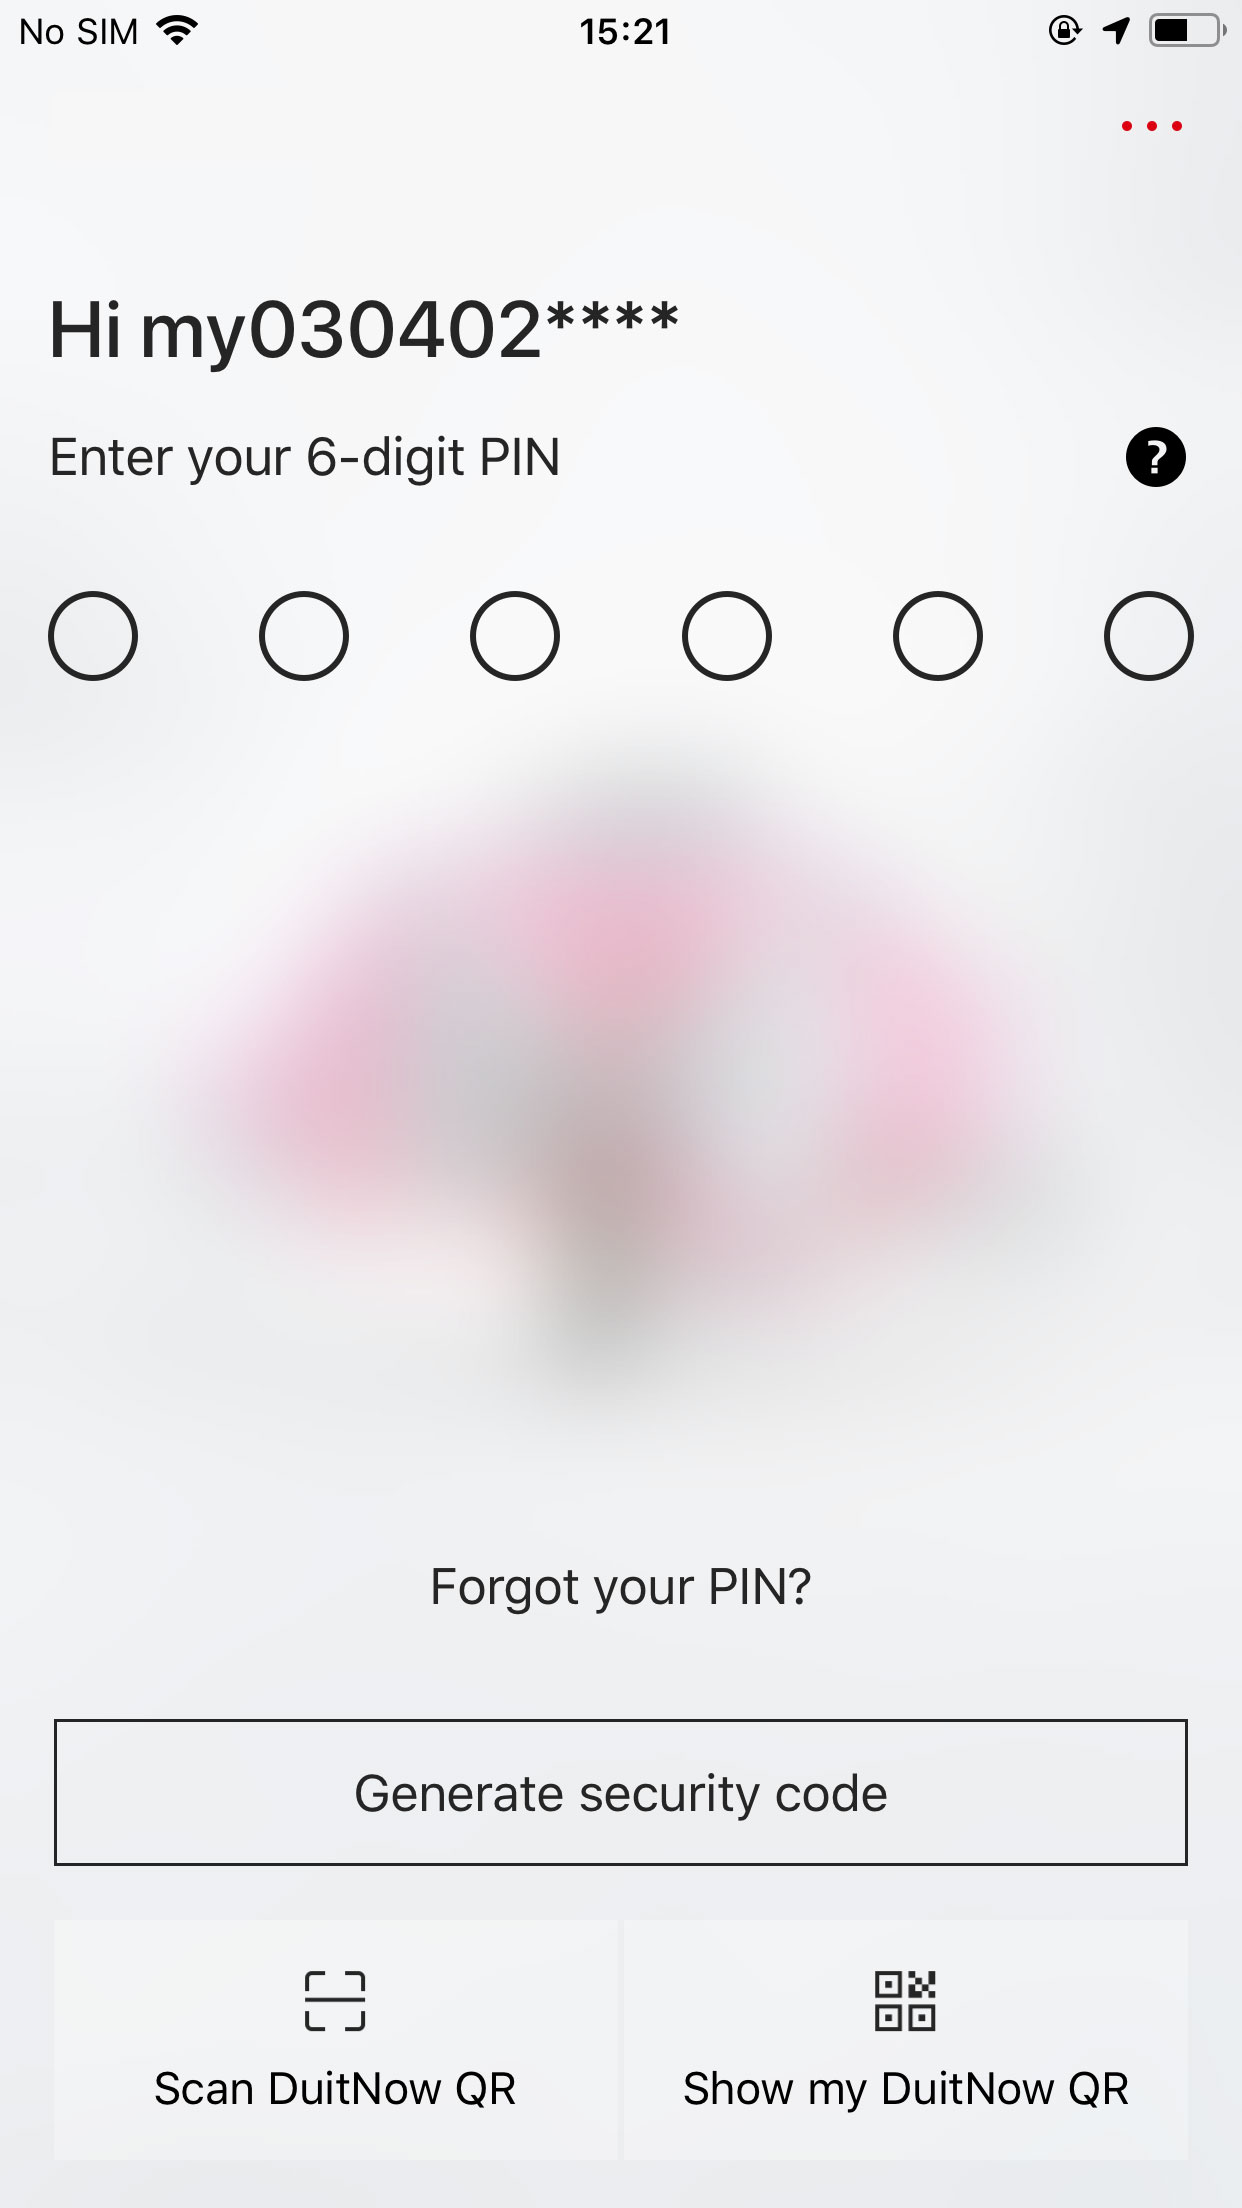 mobile banking app interface for selecting "genearte security code" option